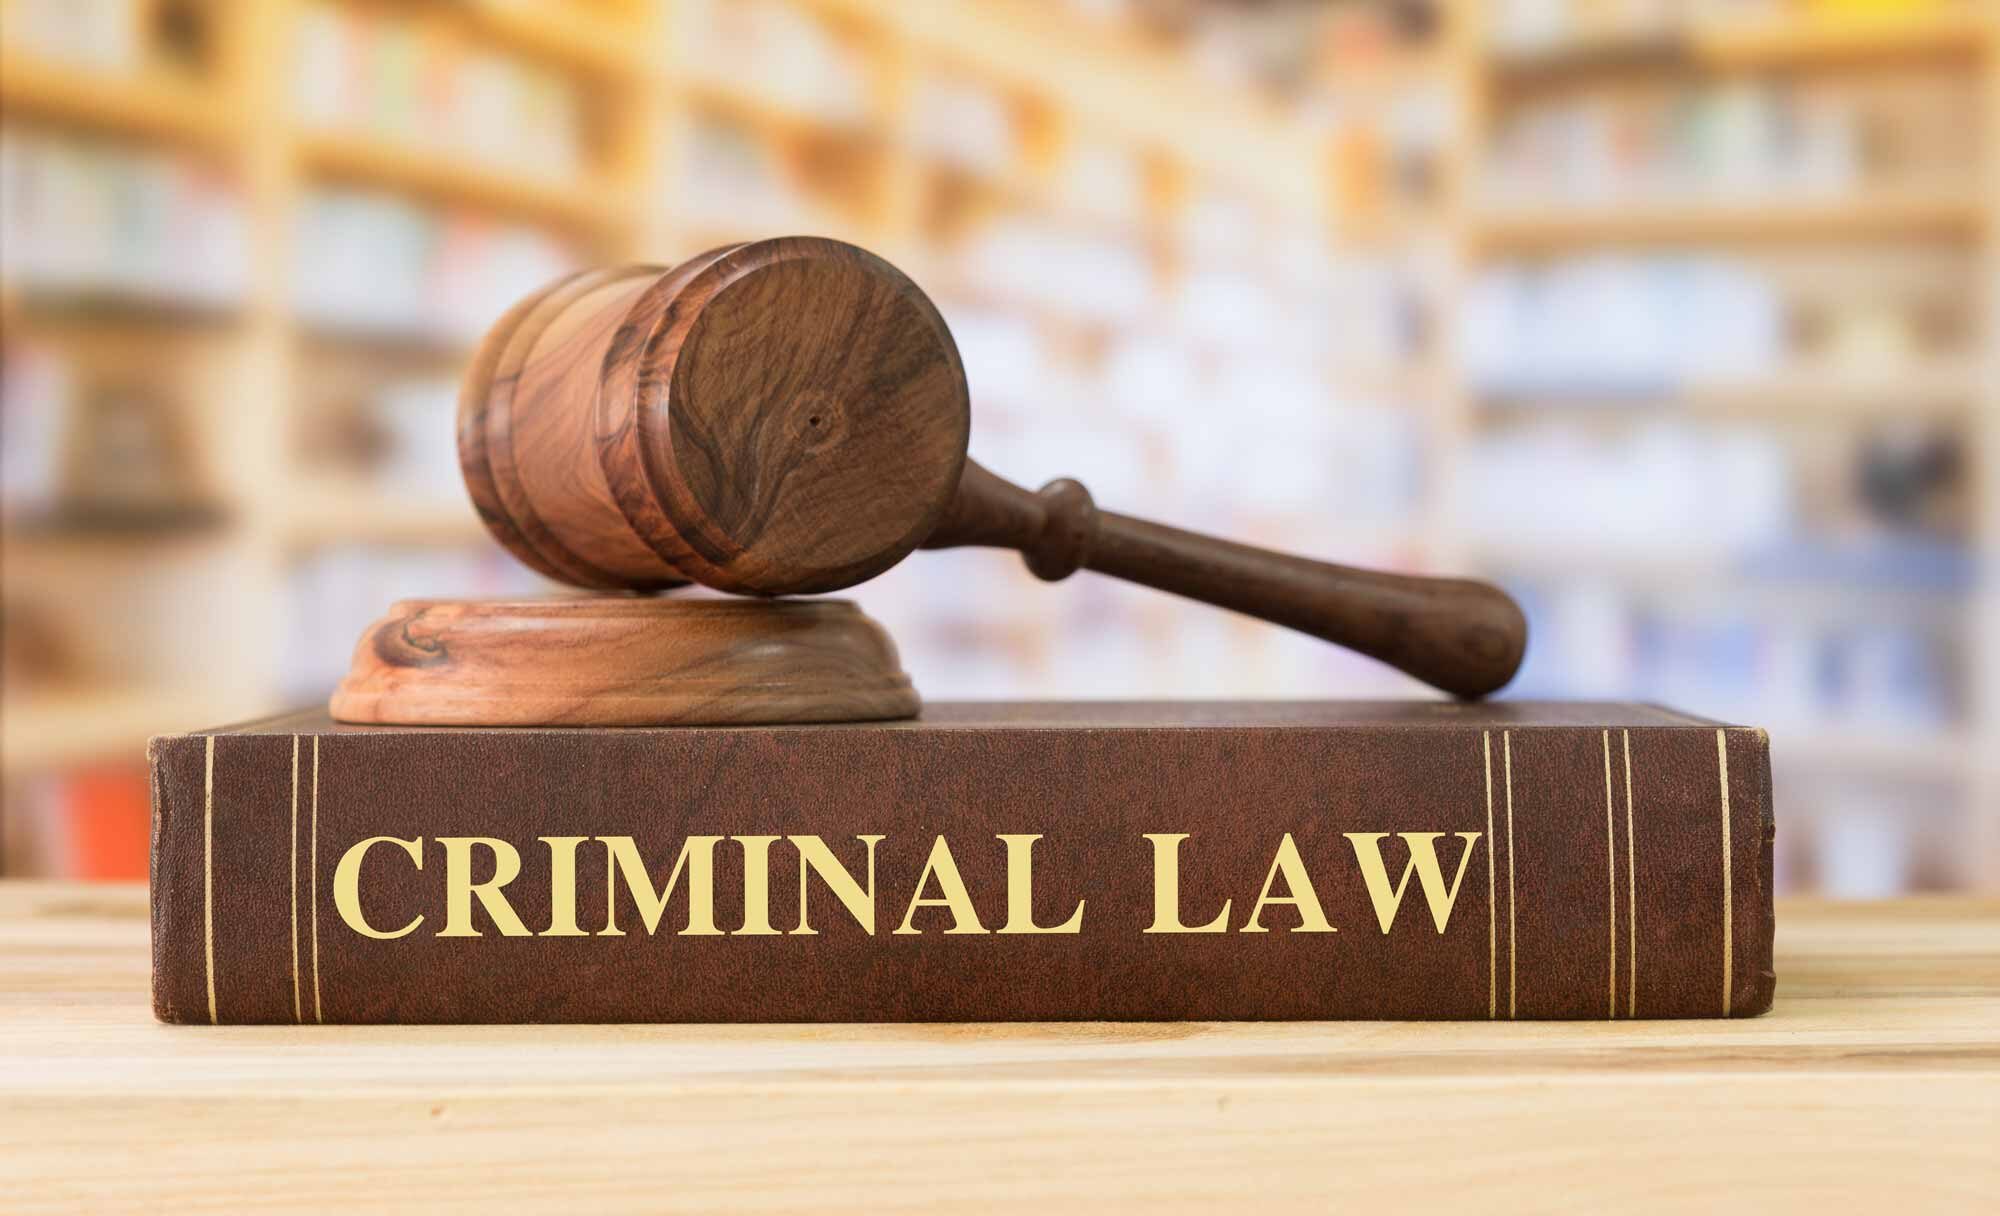 Our criminal law team can assist if you are arrested or charged with a criminal offence.